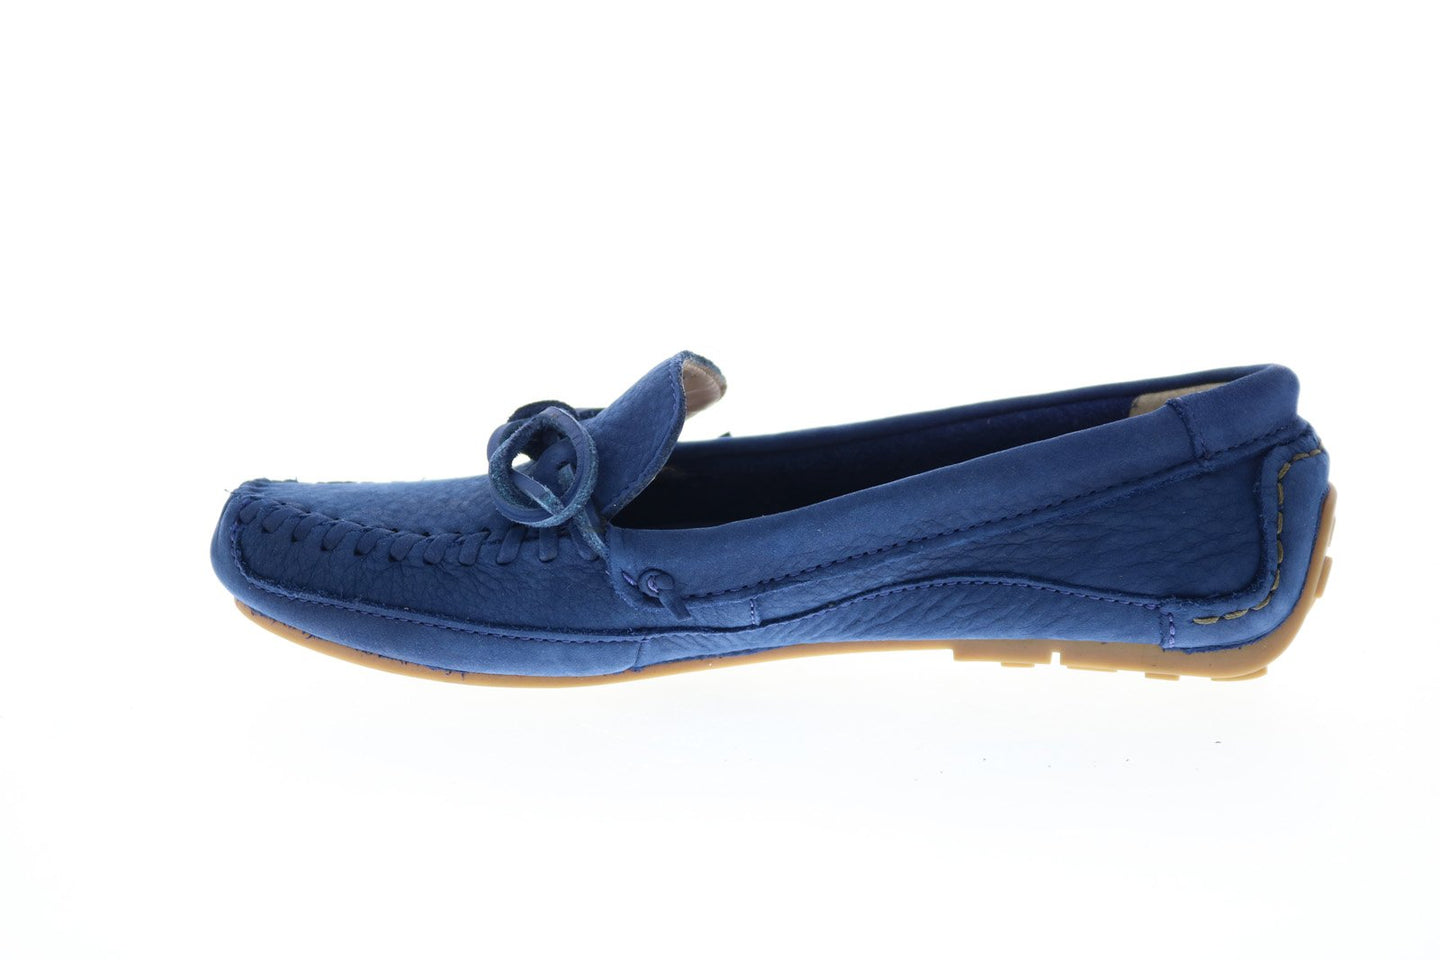 Clarks Natala Rio 26123061 Womens Blue Suede Lace Up Moccasin Flats Sh ...